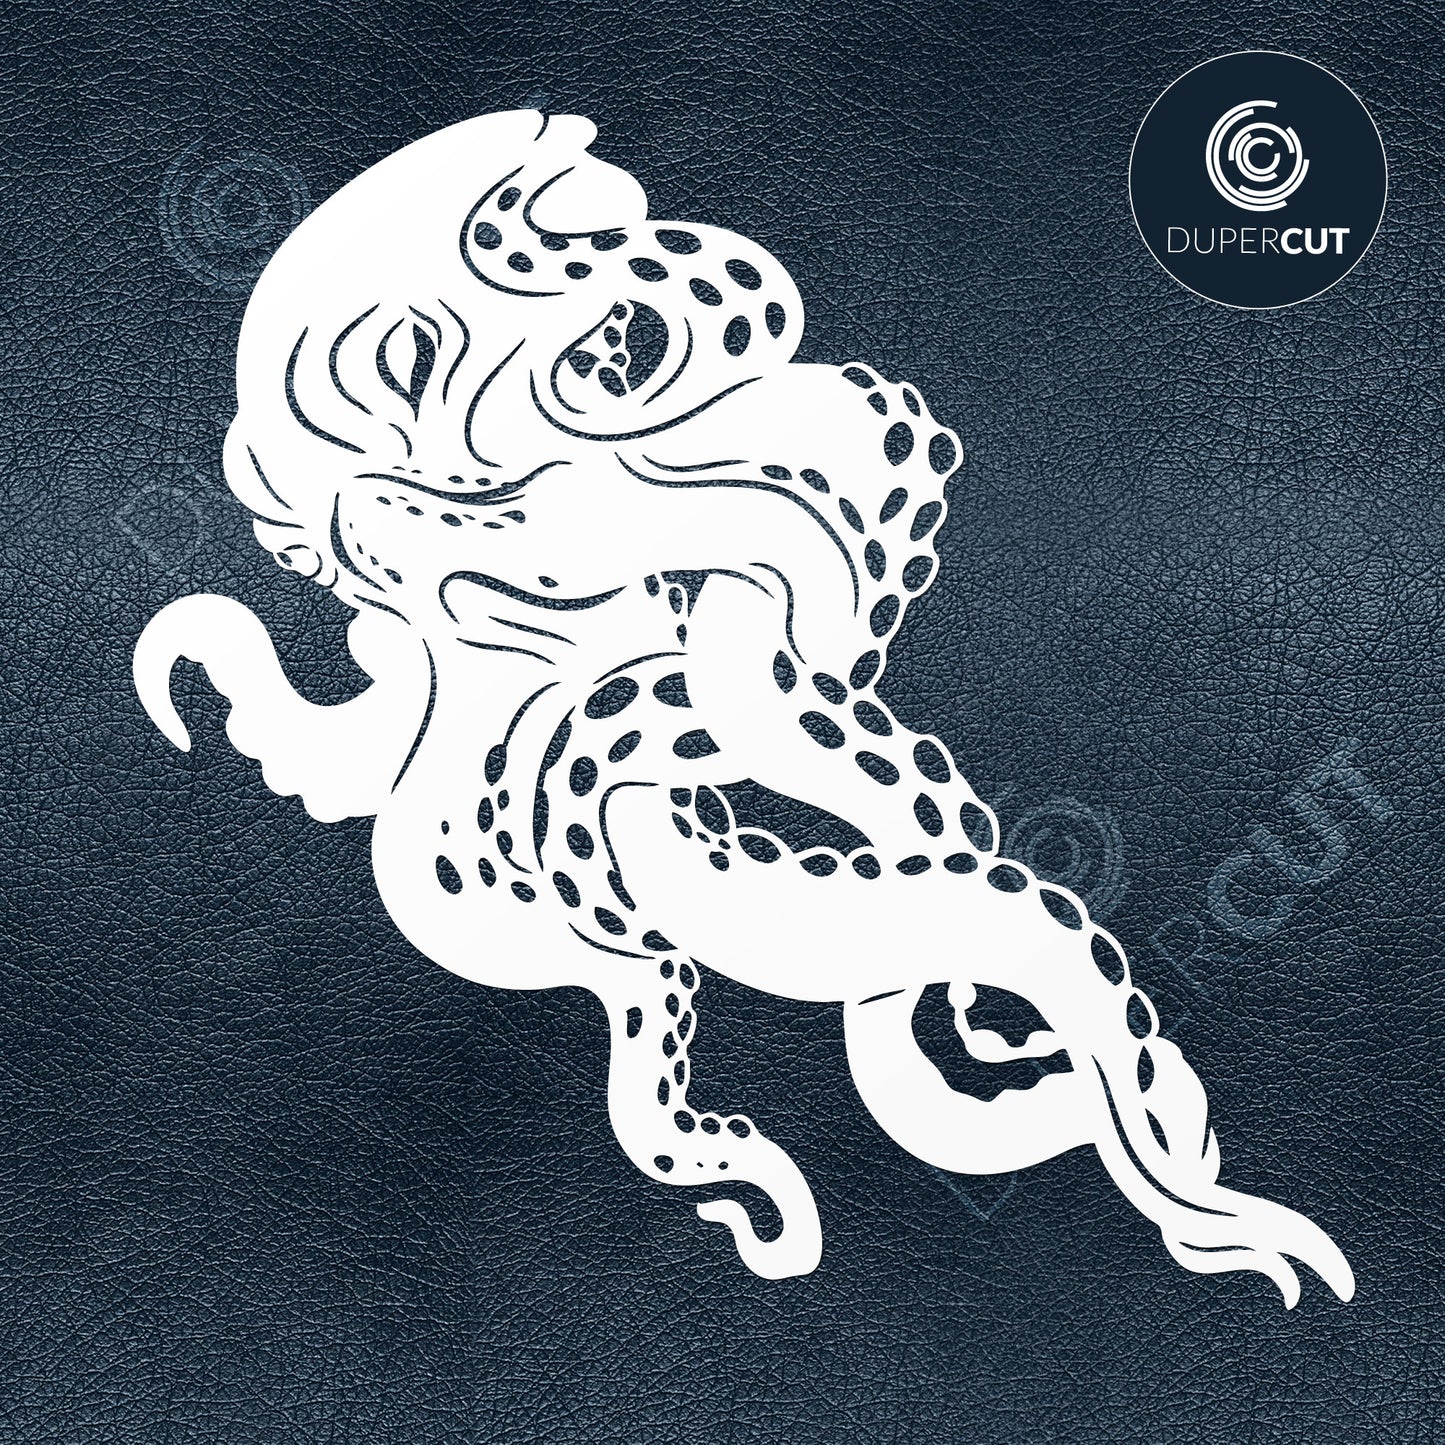 Octopus art illustration silhouette. SVG JPEG DXF files. Template for paper cutting, laser, print on demand. For use with Cricut, Glowforge, Silhouette Cameo, CNC machines. Personal or commercial license.